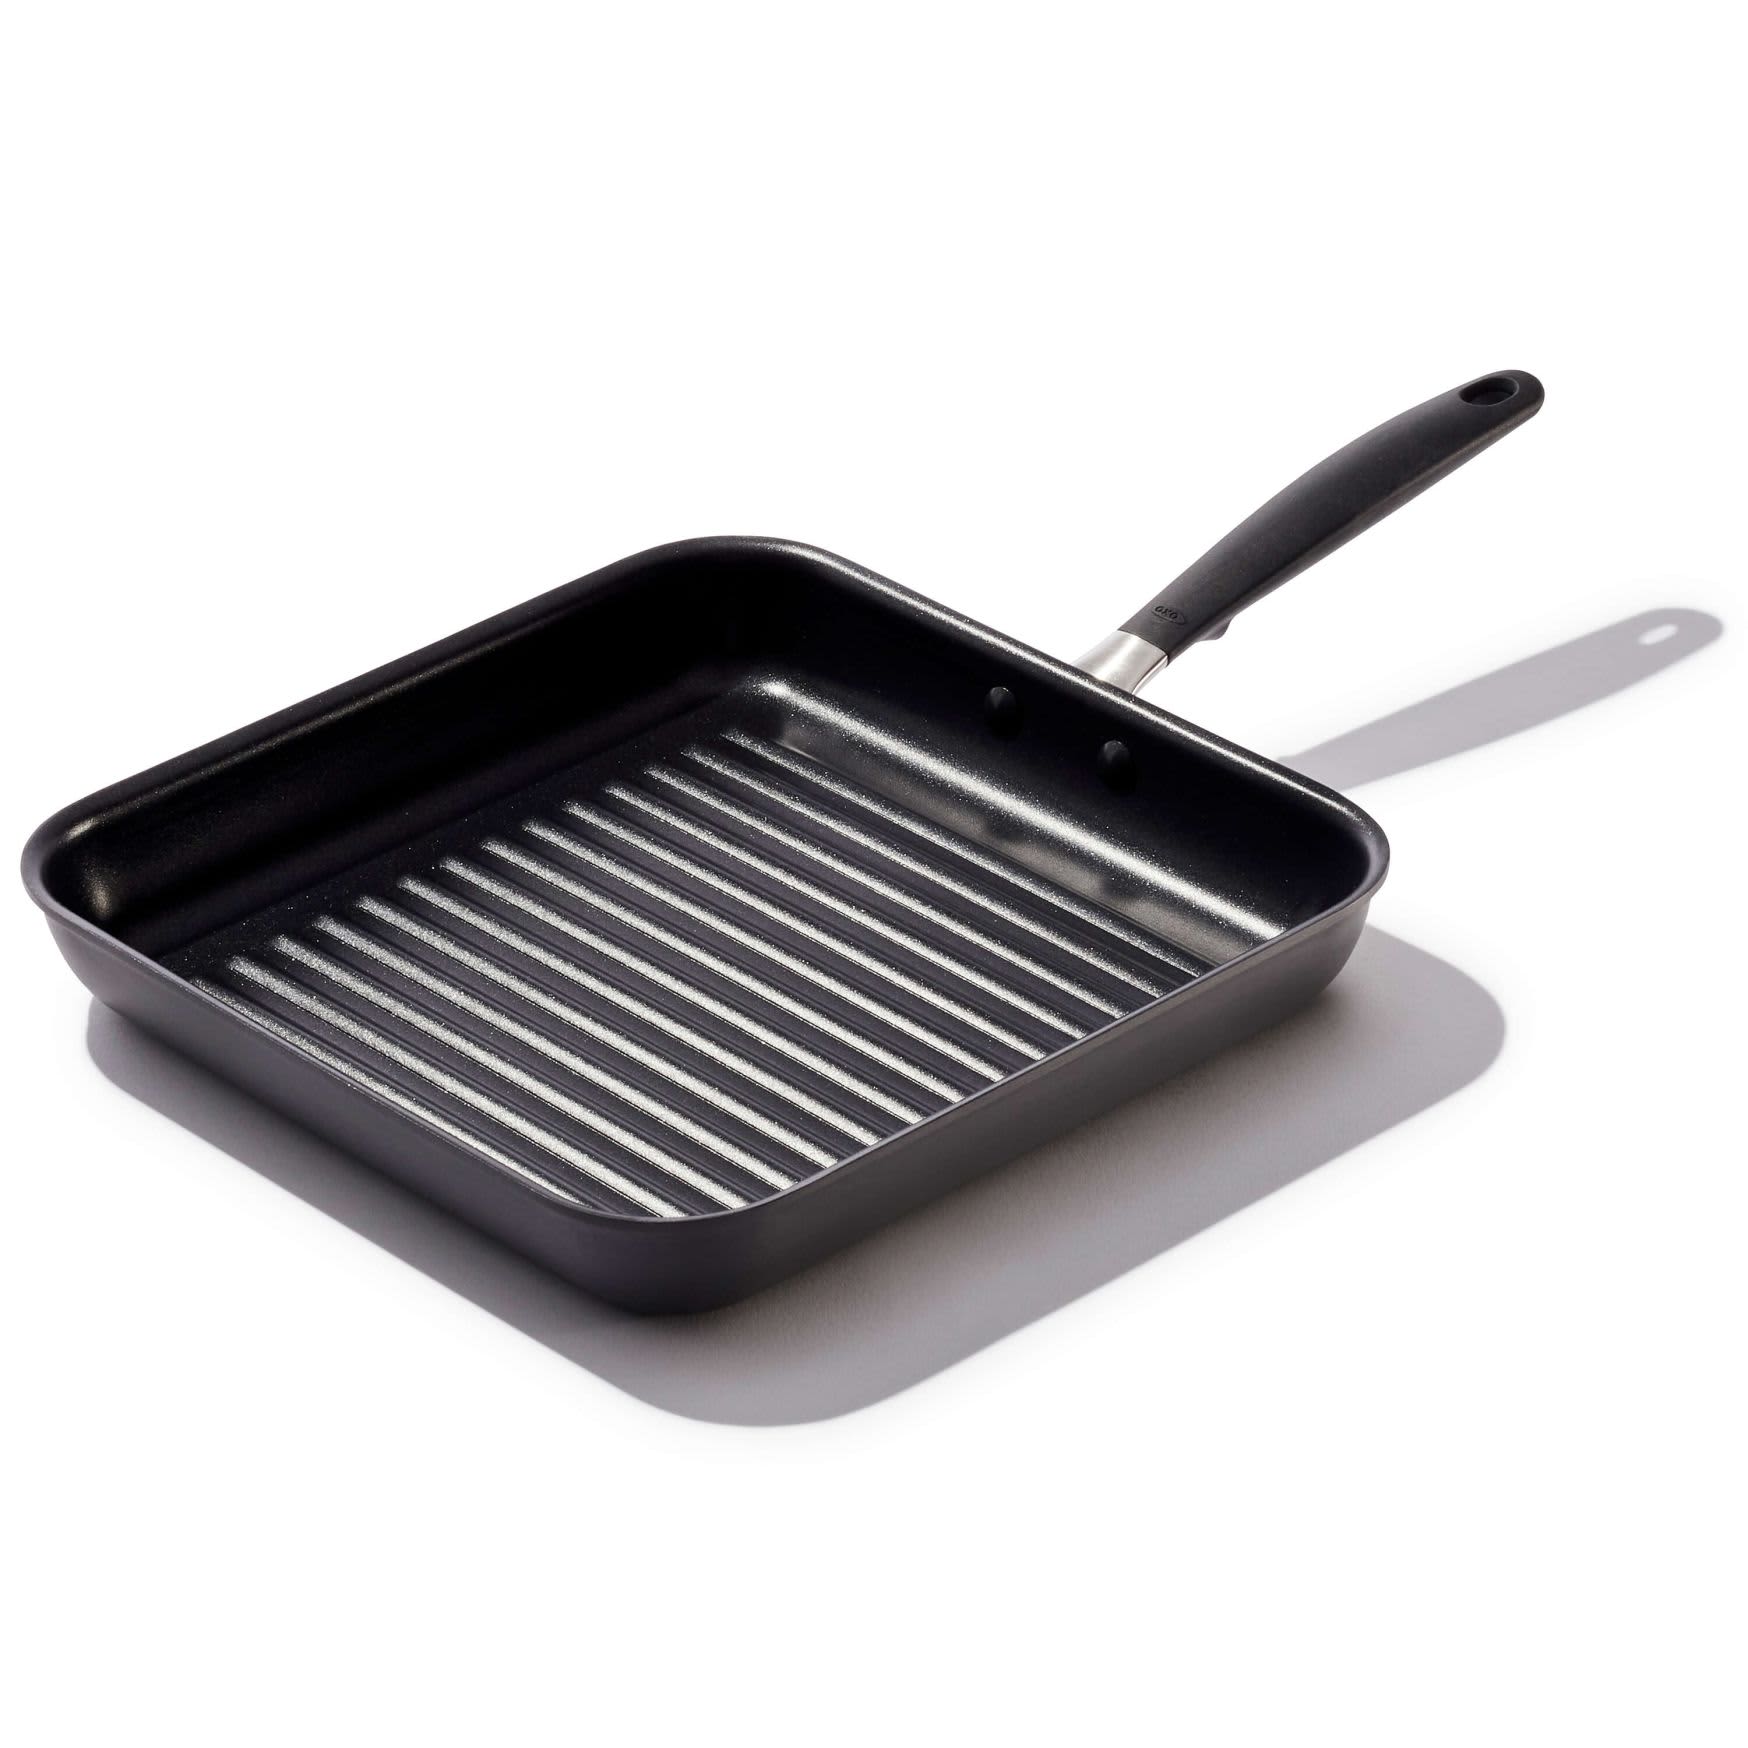 The OXO Good Grips 10-Inch Nonstick Skillet Is Just $30 on